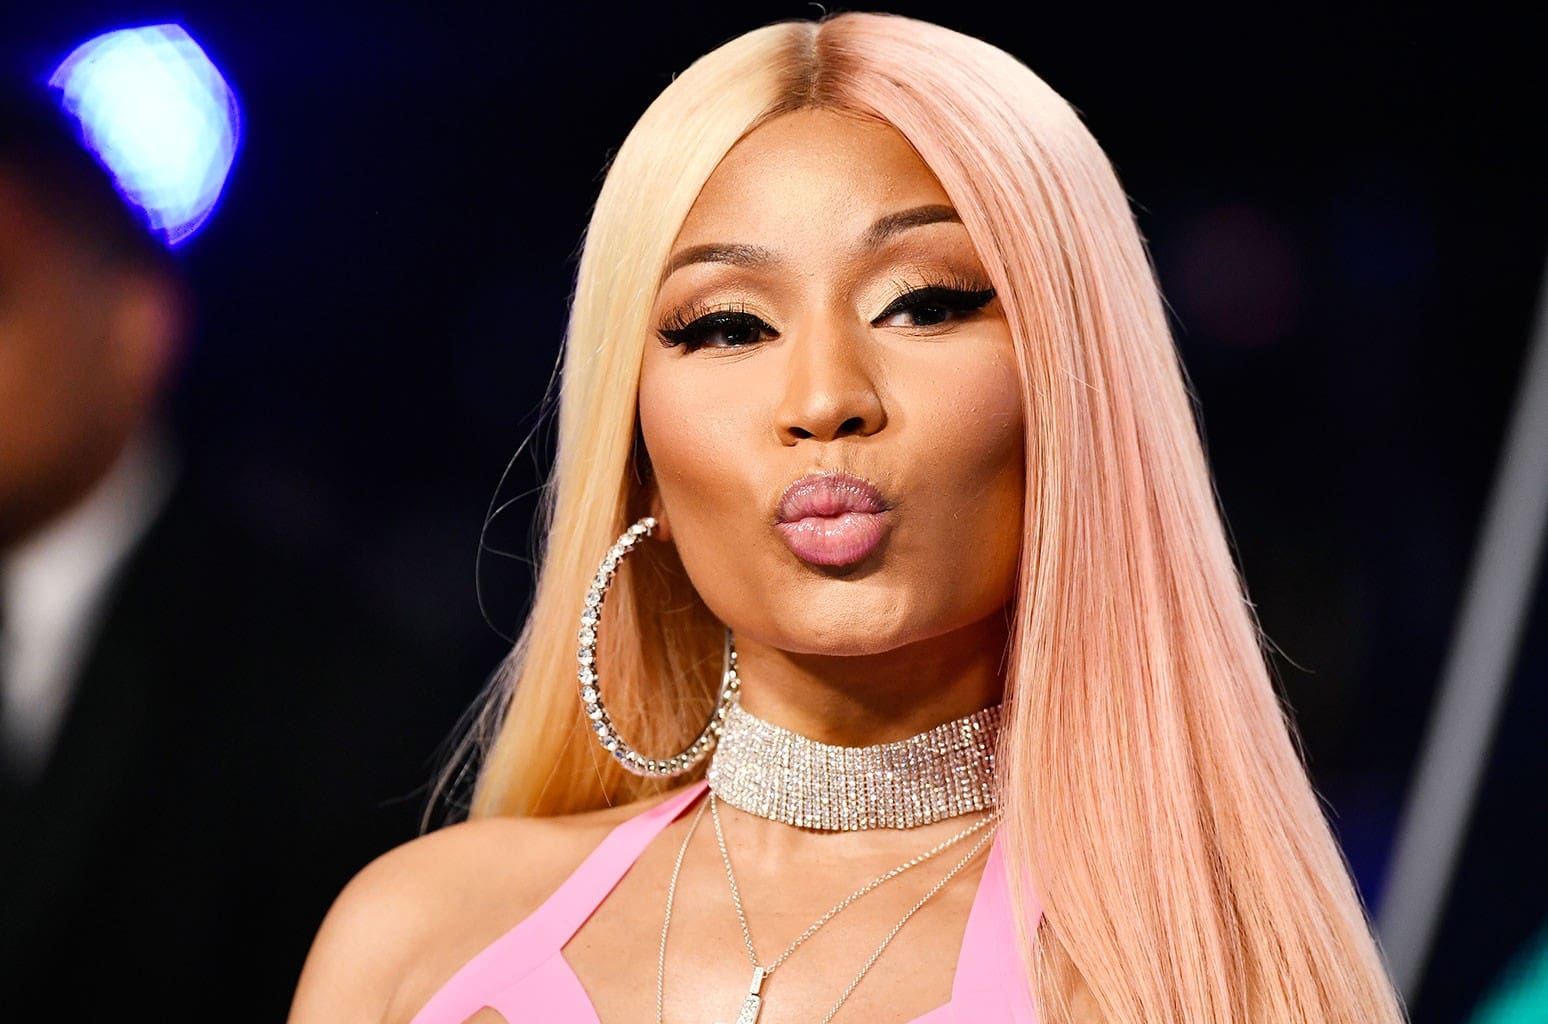 nicki-minaj-plays-an-unreleased-track-and-fans-go-crazy-with-excitement